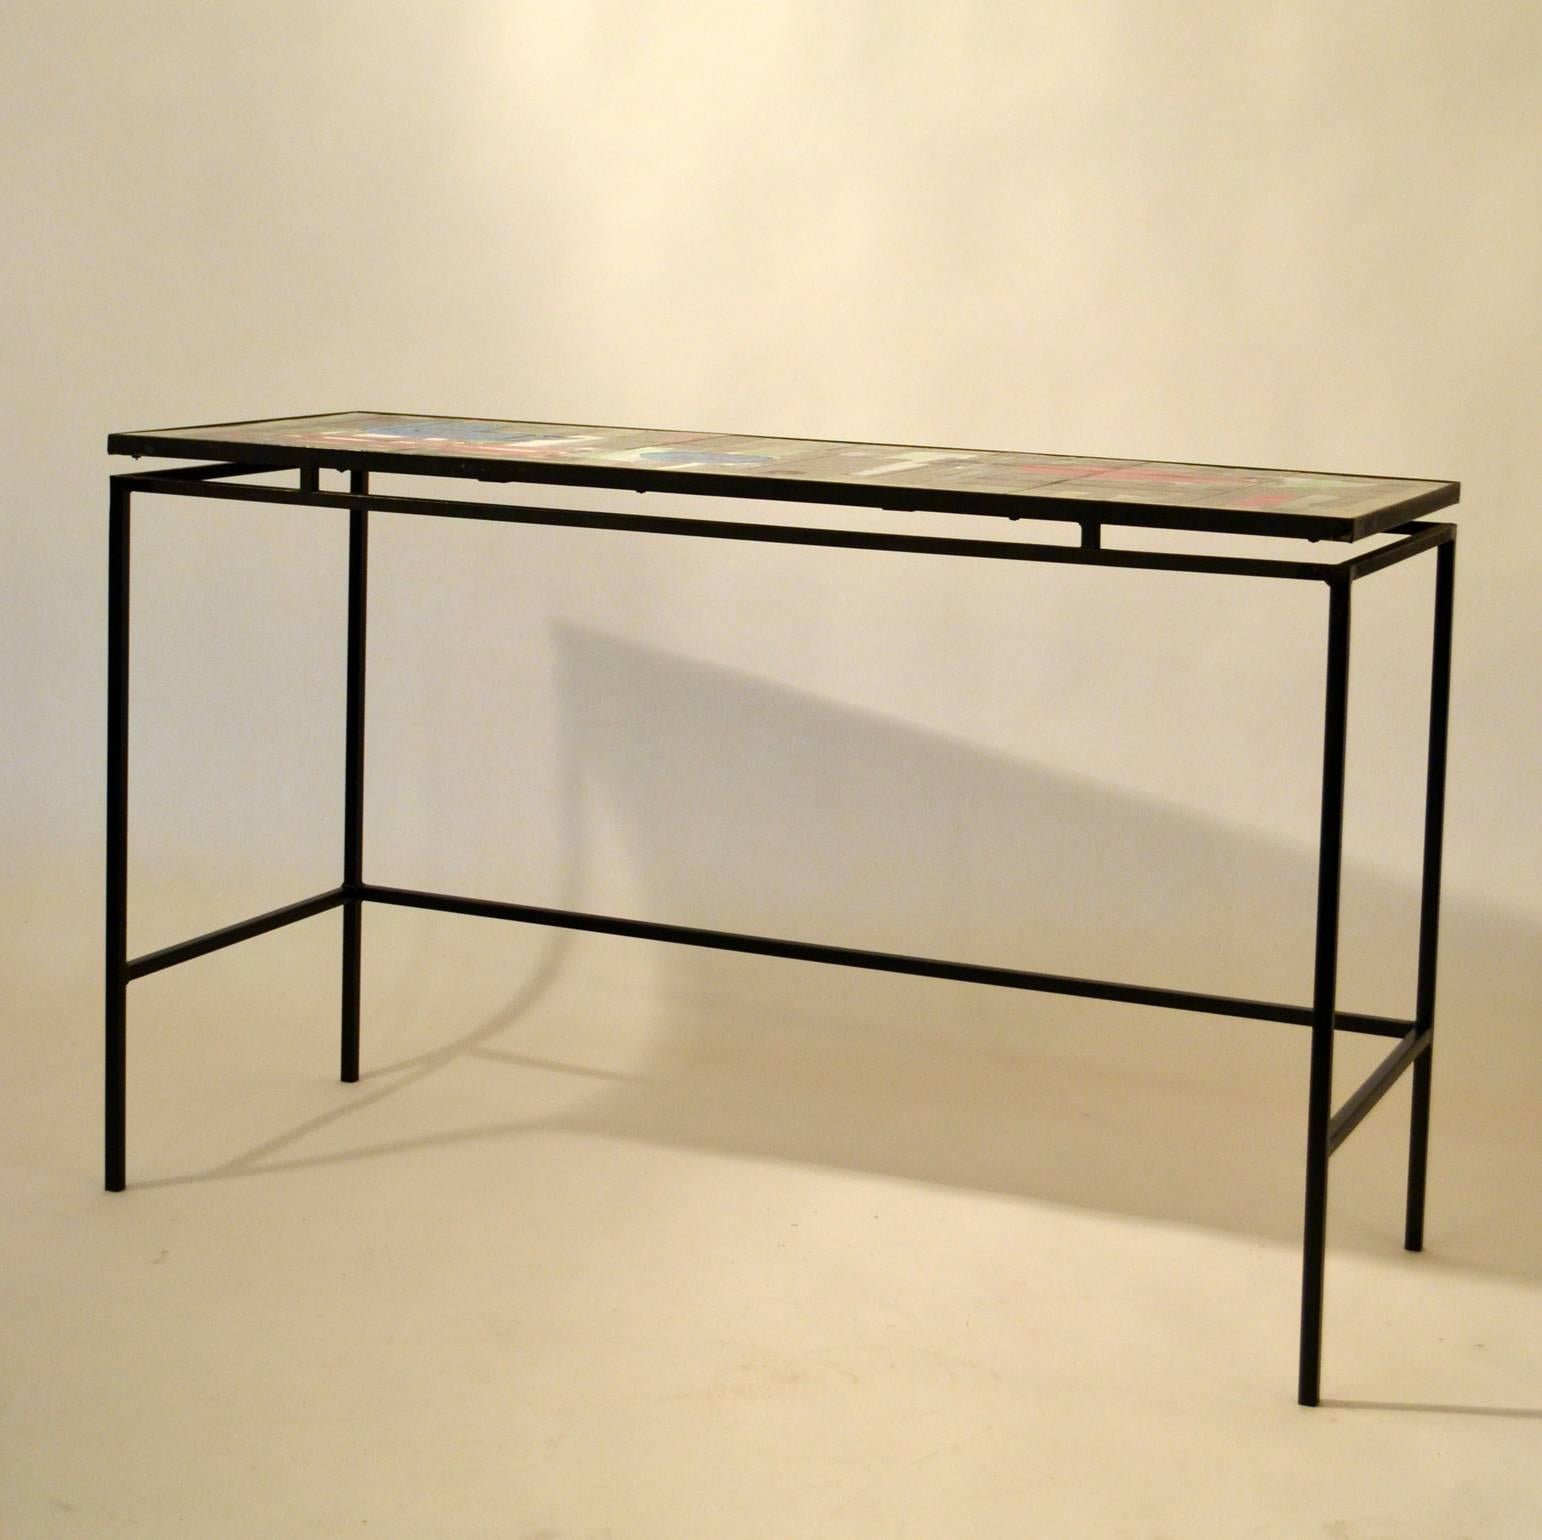 20th Century Console or Desk Ceramic Top on Metal Frame by Belarti